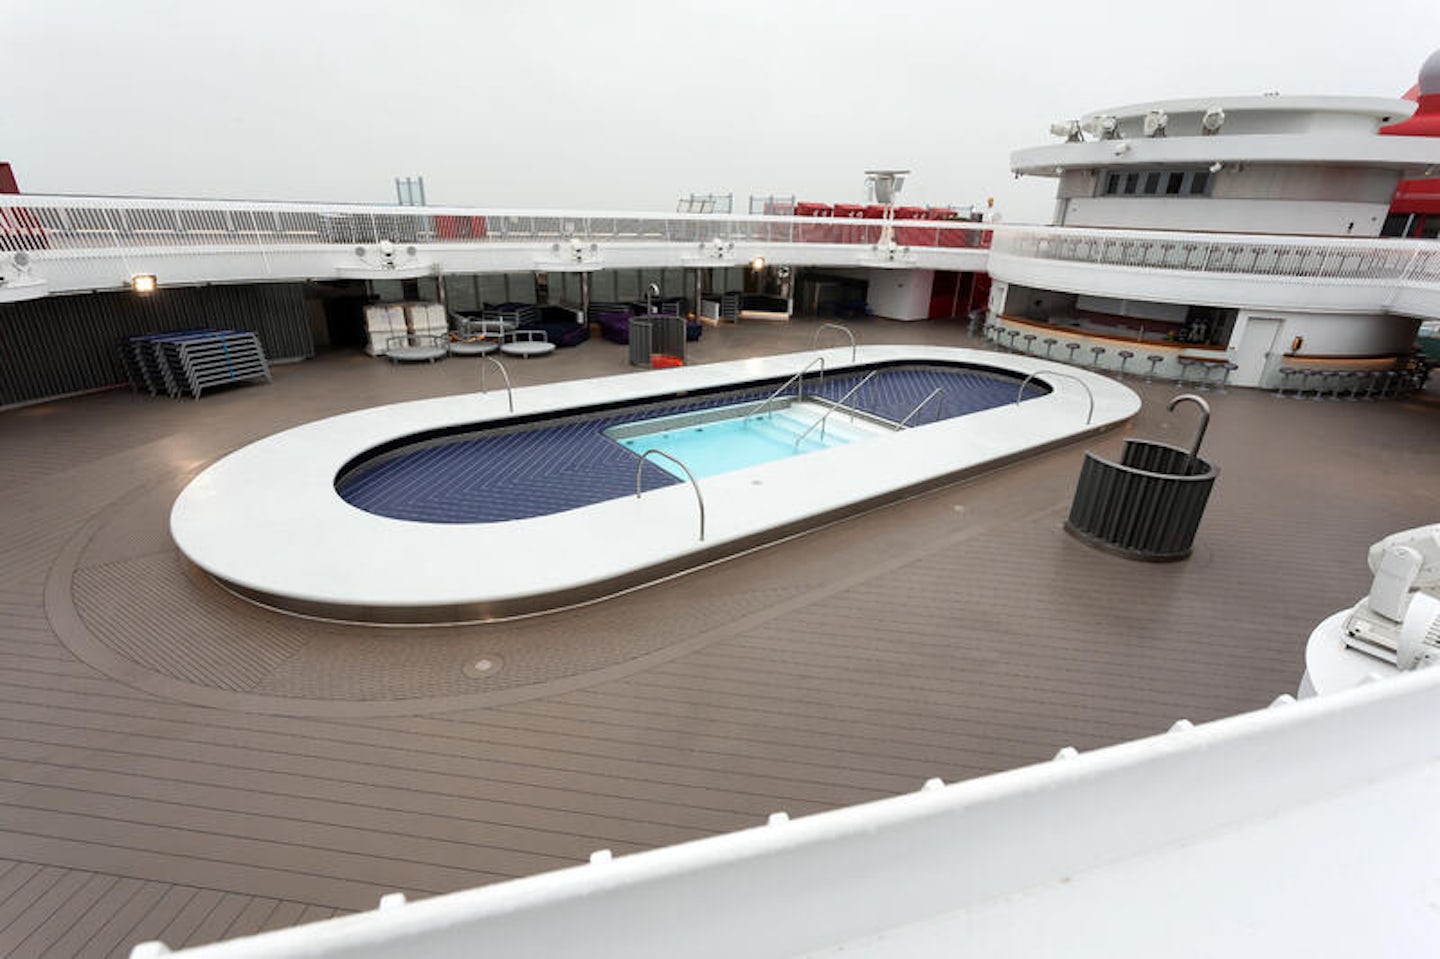 The Main Pool on Scarlet Lady